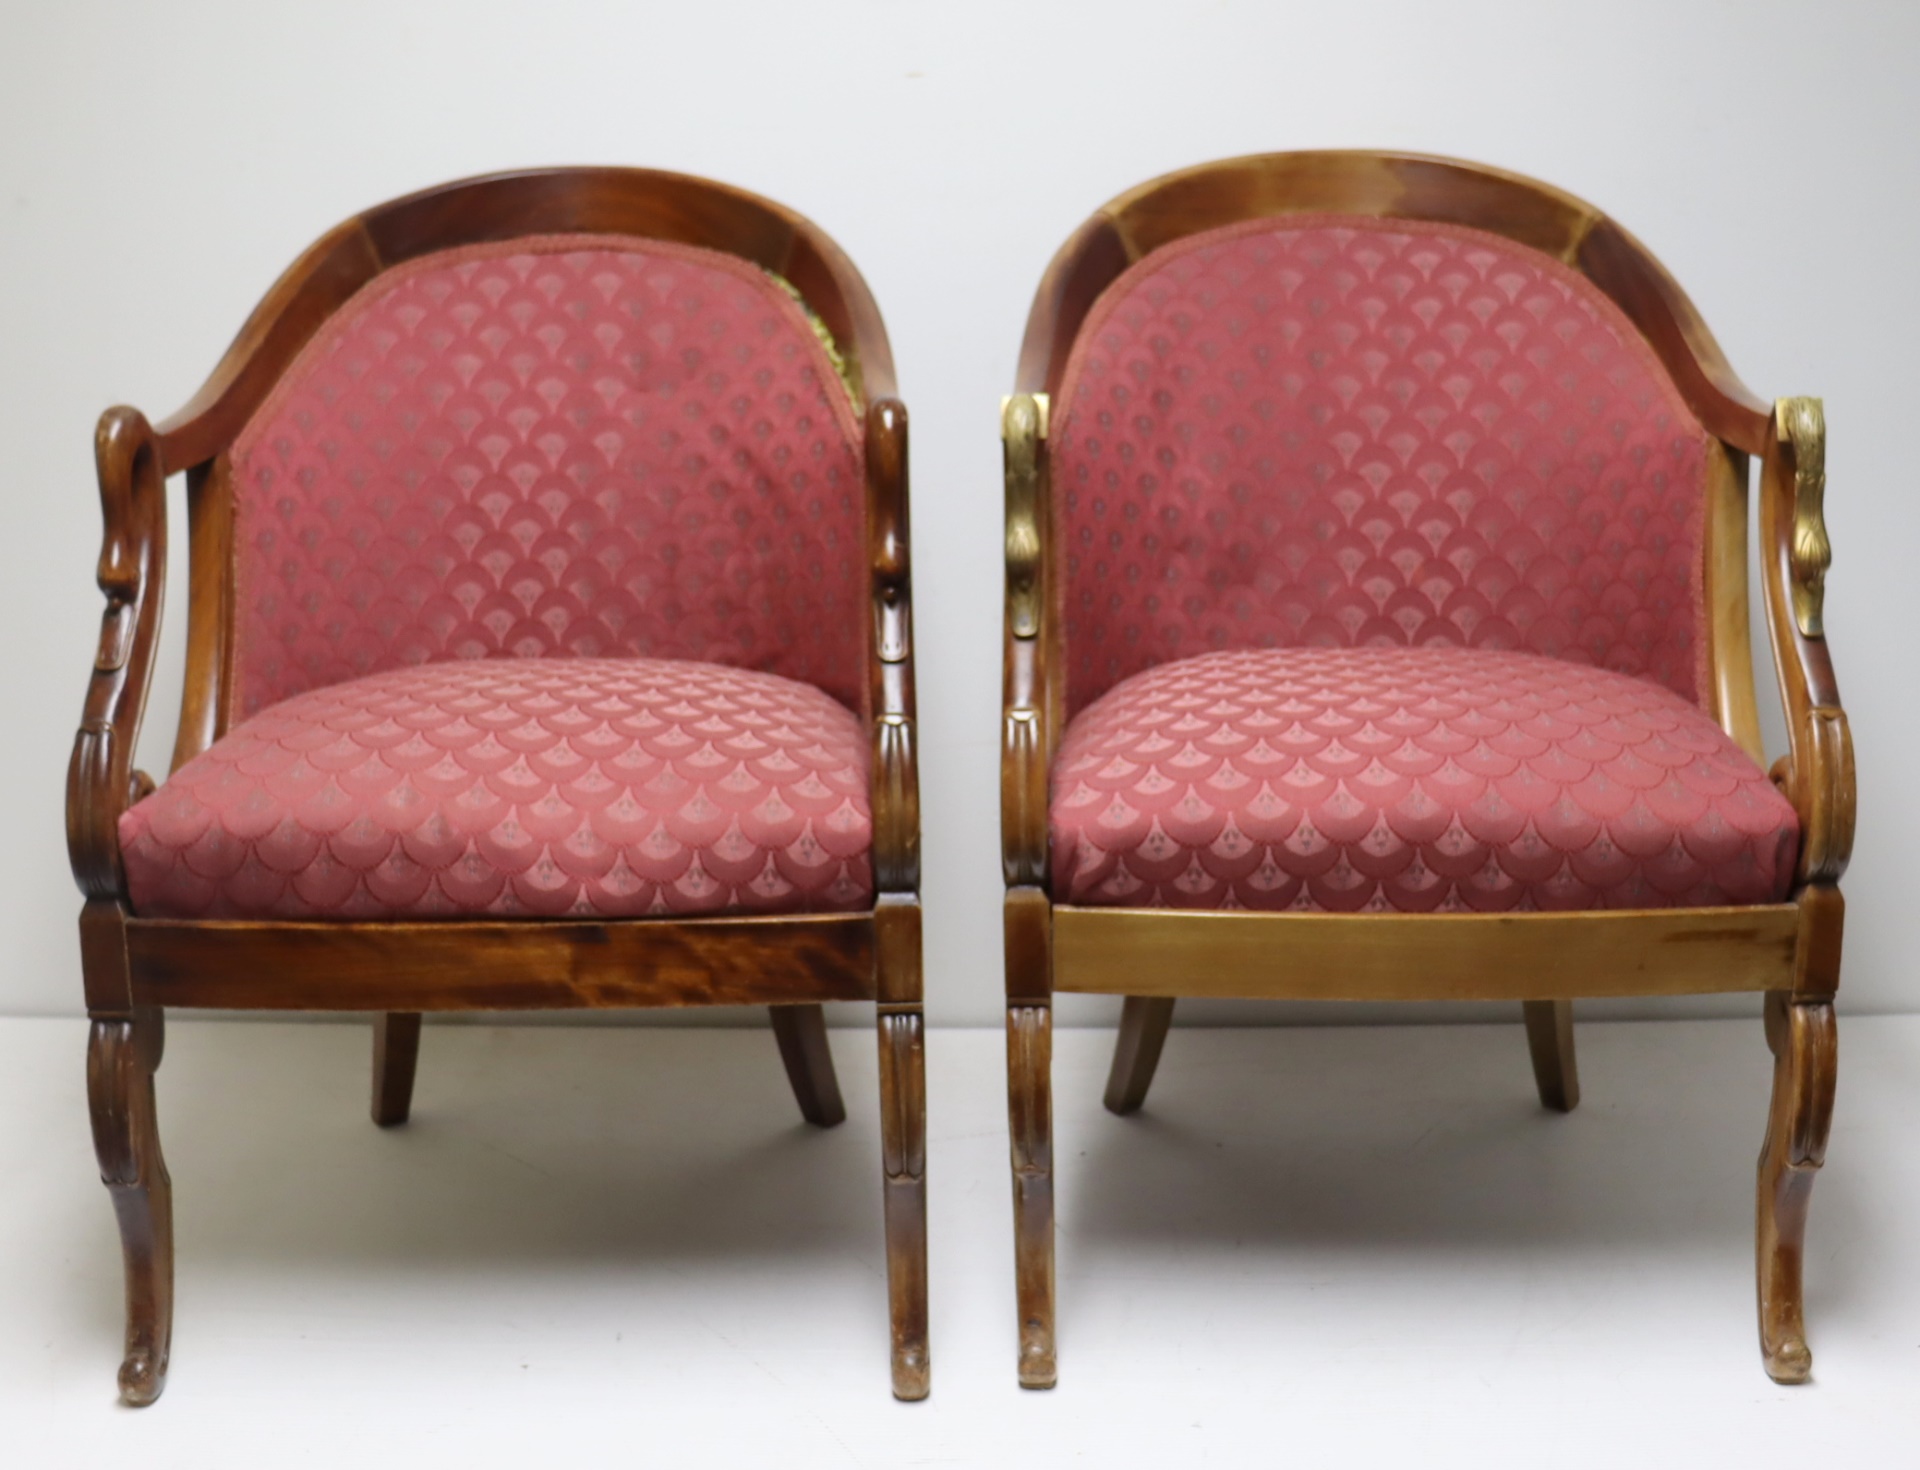 A PAIR OF ANTIQUE FRENCH CHAIRS 3b77e5